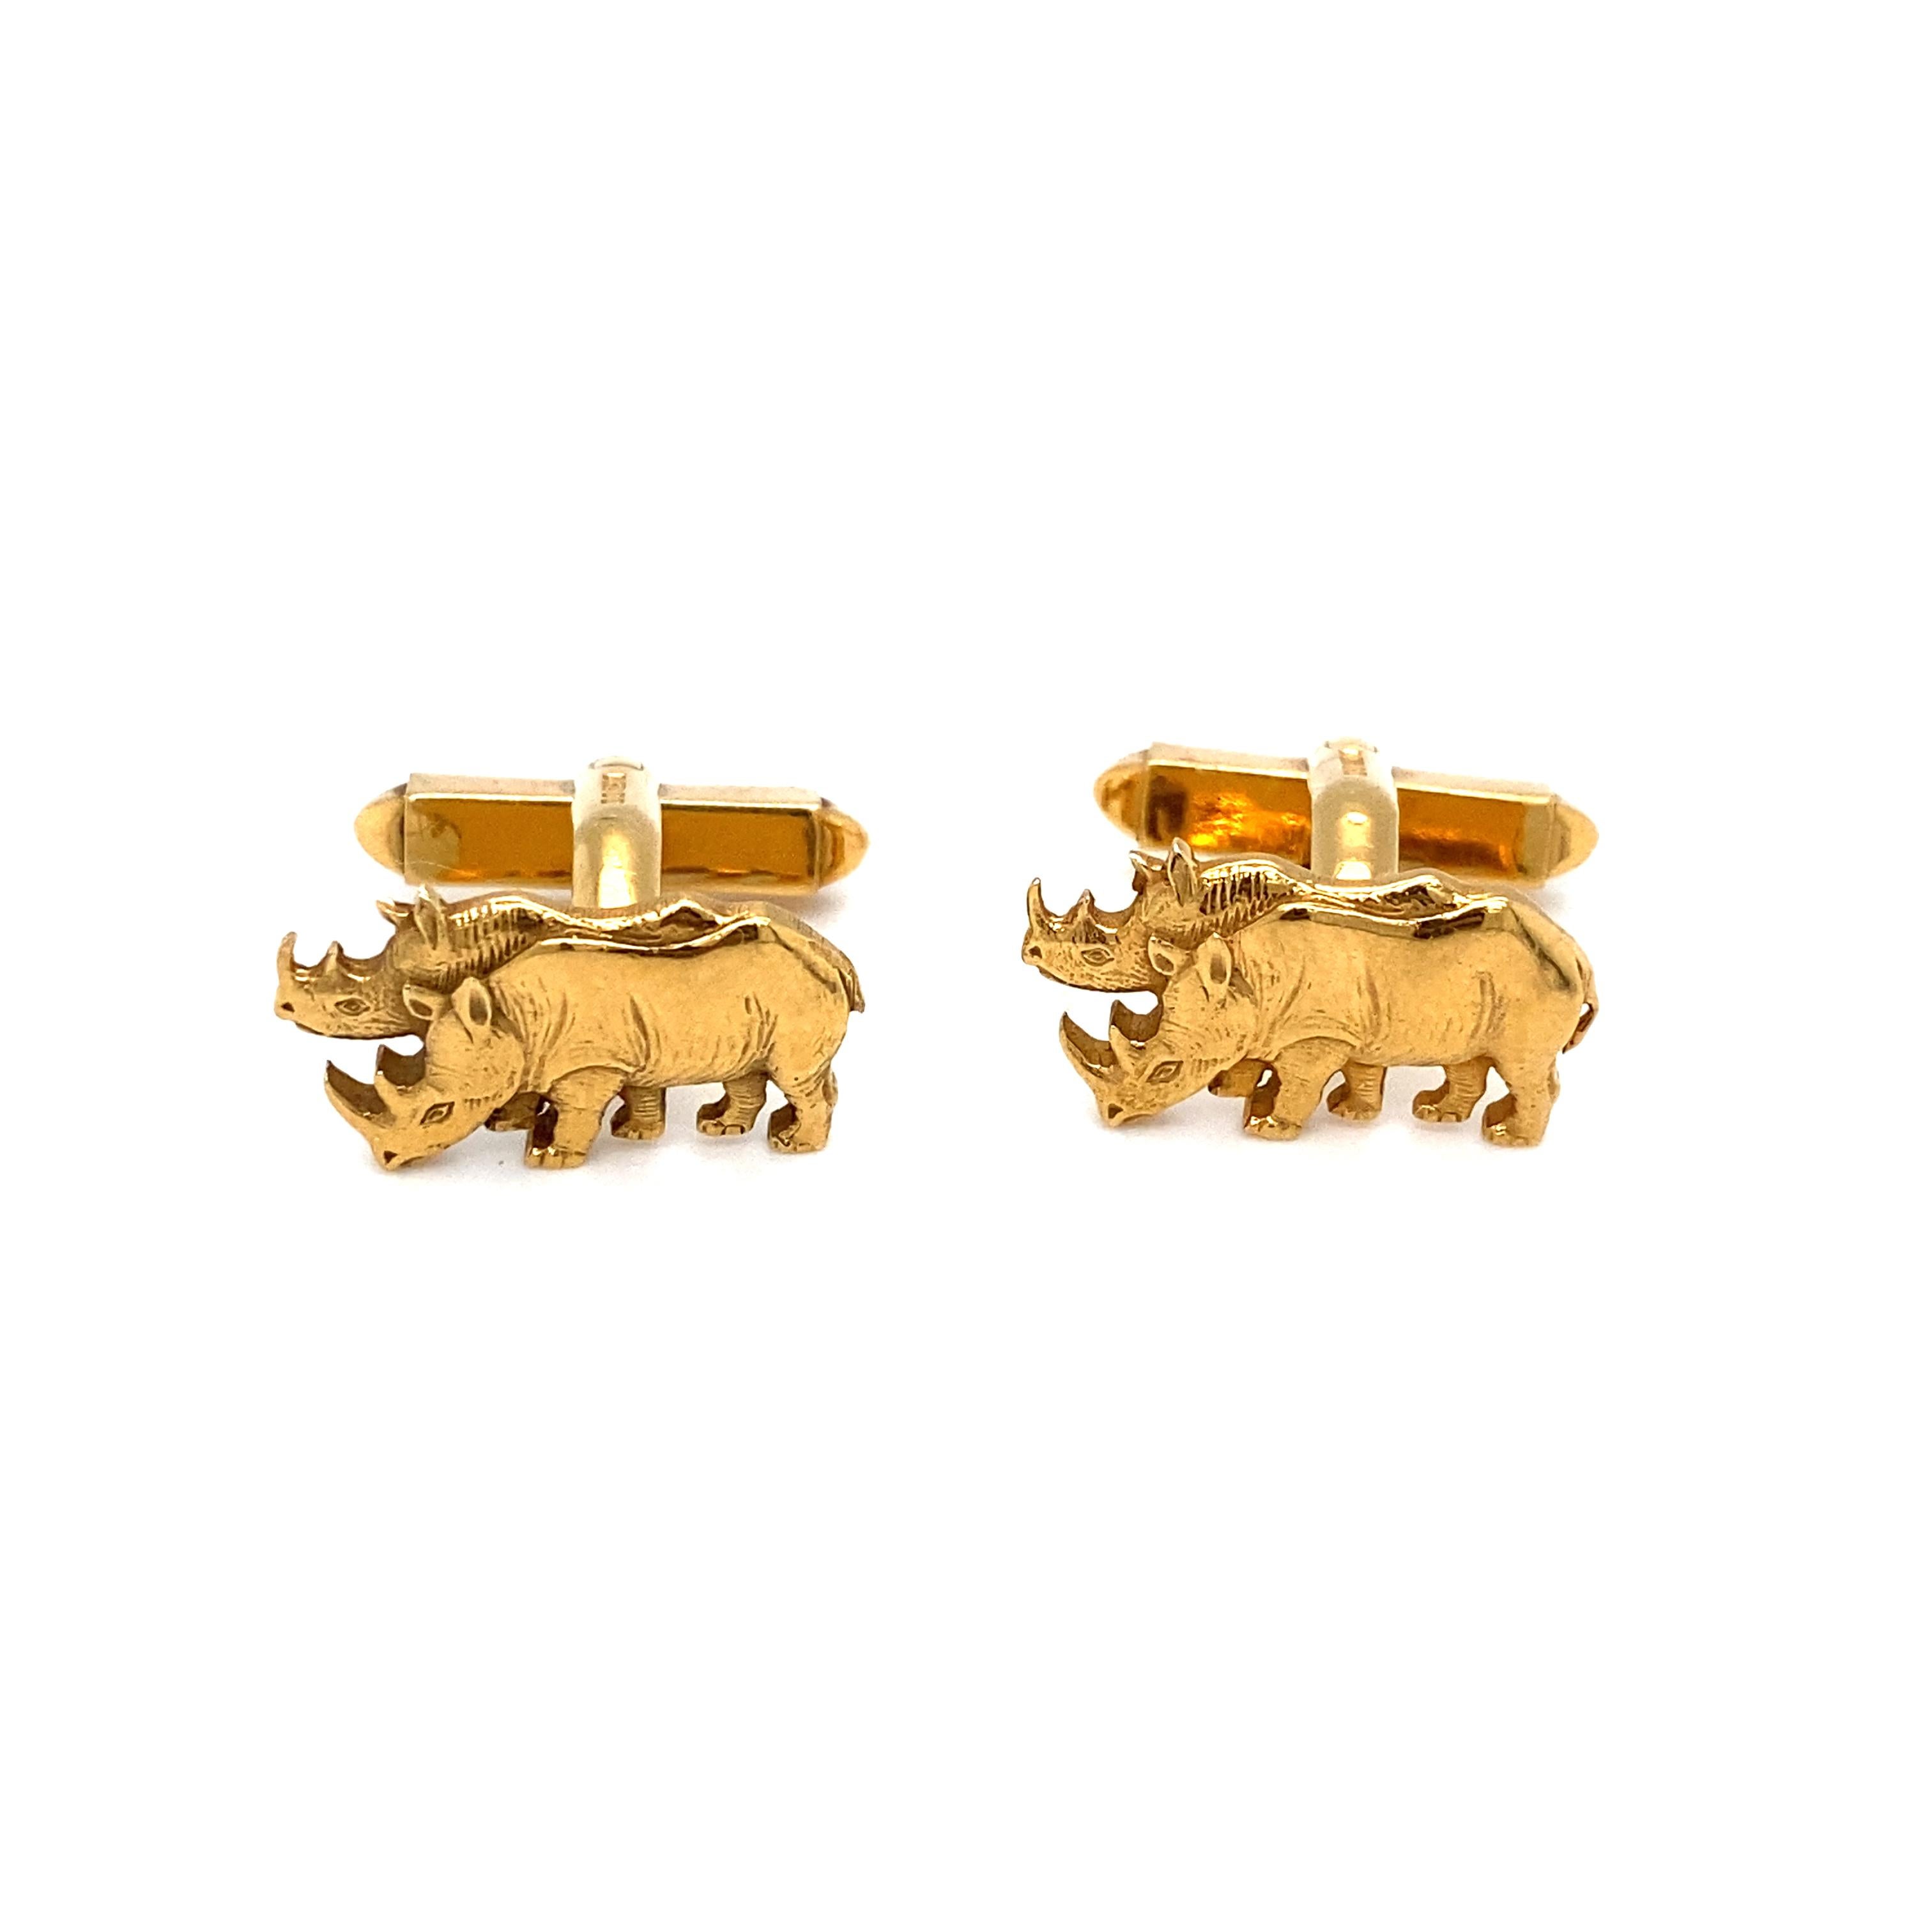 Item Details: These unique rhinoceros cufflinks by ASPREY London are perfect for an animal lover. Beautifully crafted of 18 karat yellow gold, these cufflinks are hallmarked with the Asprey logo, as well as British hallmarks for 18 karat yellow